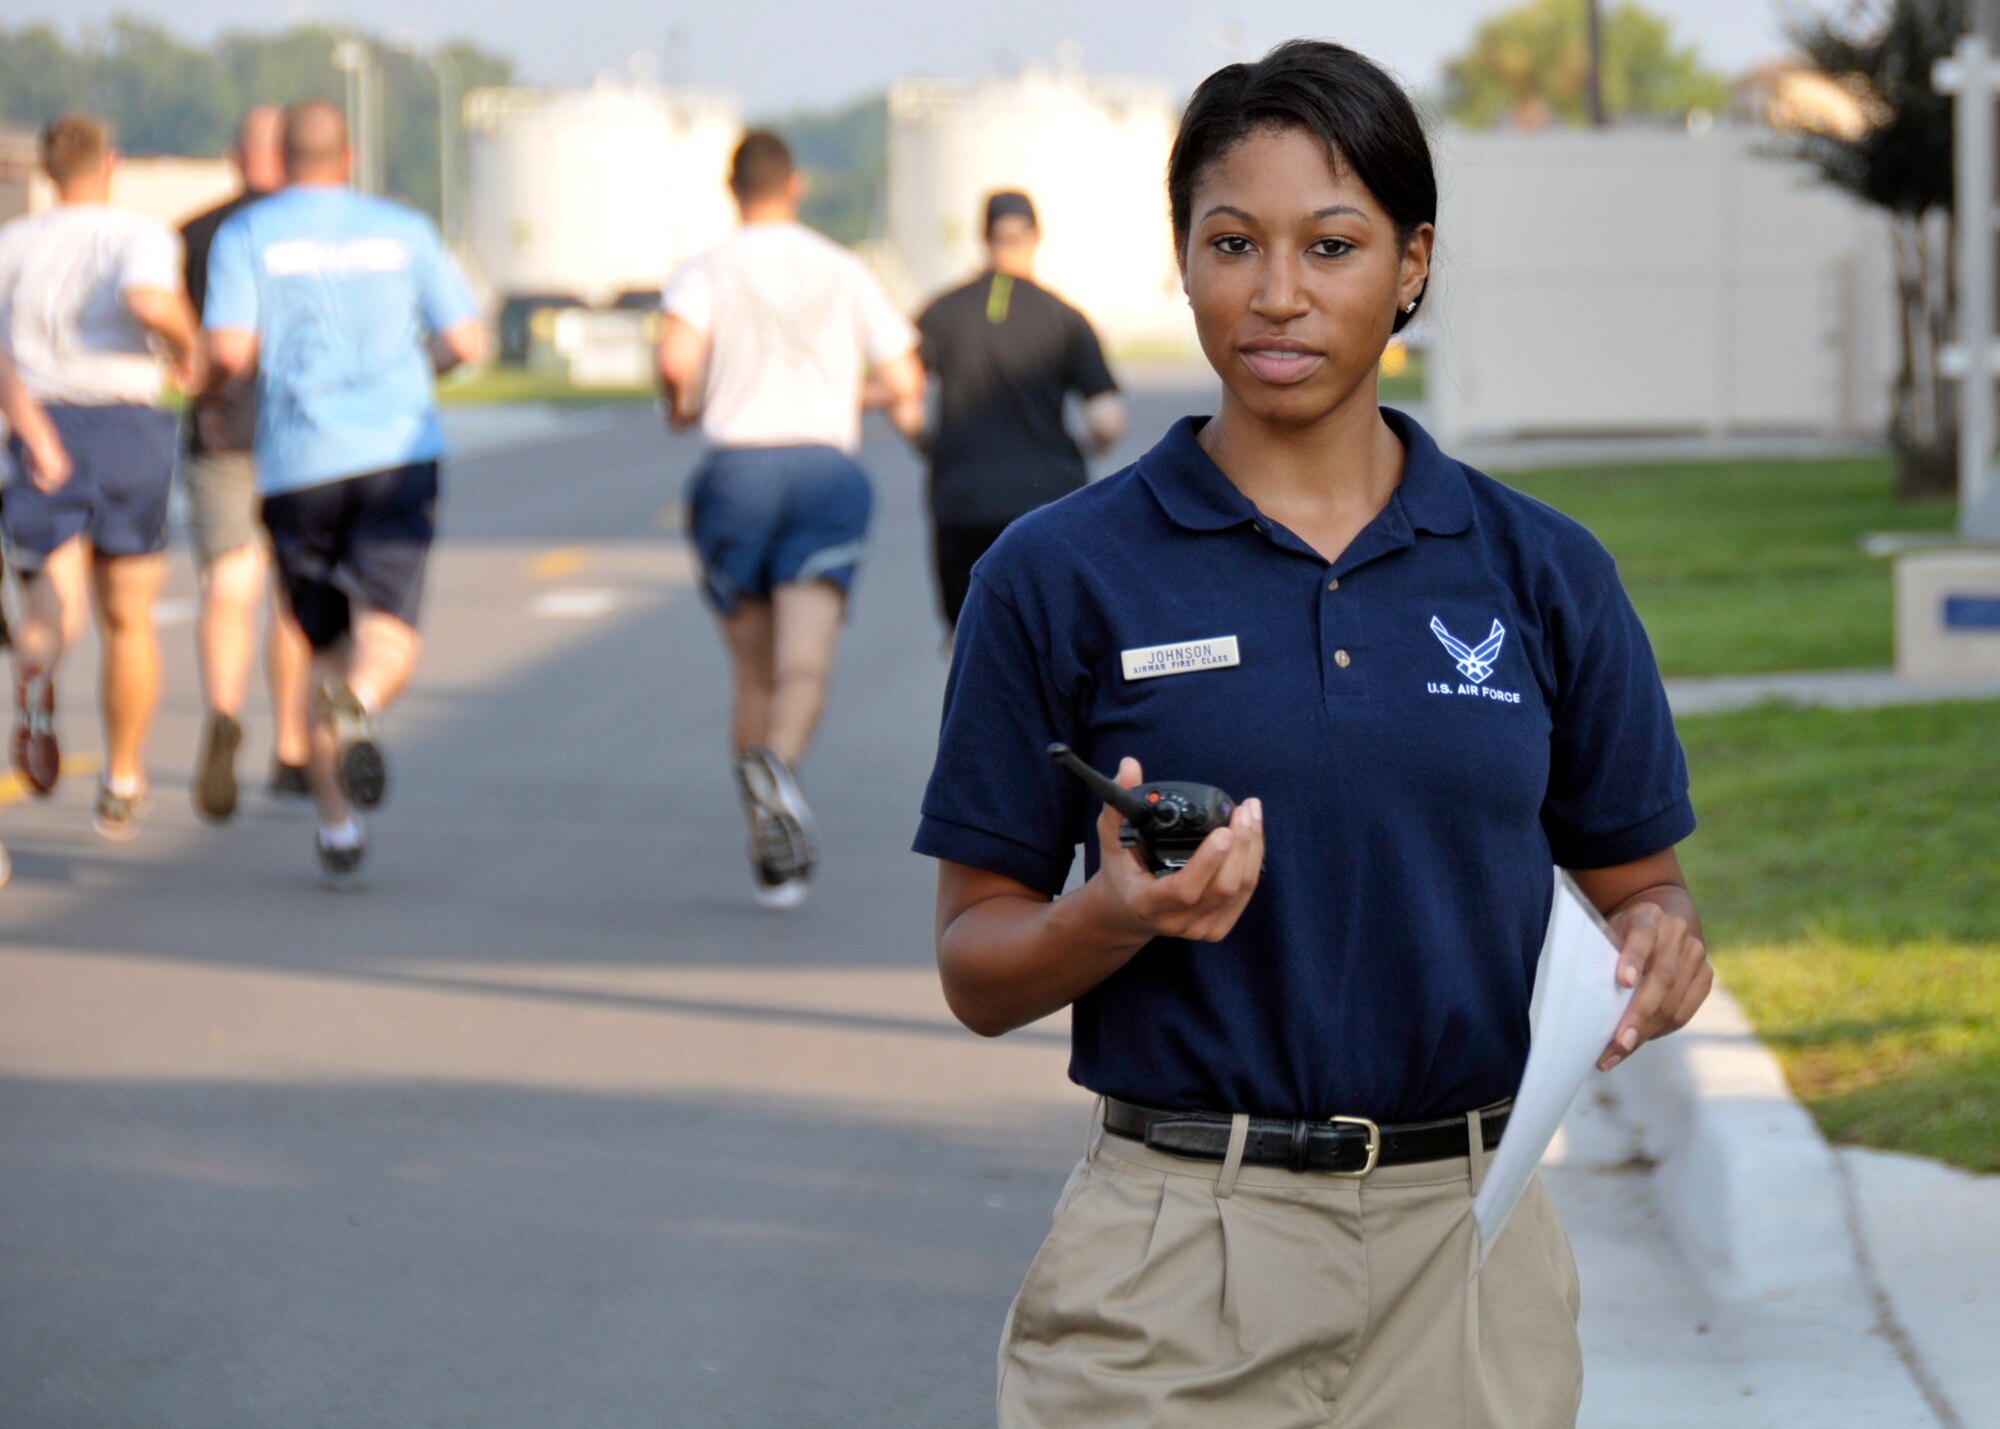 U.S. Air Force Airman 1st Class Ishimine Johnson announces the beginning of the running portion for a physical training (PT) test over a radio to fellow PT leaders at the 125th Fighter Wing, Jacksonville International Airport, Jacksonville Florida., Aug. 17, 2014. Johnson spends her time off from the Air National Guard training for and competing in bodybuilding competitions. (U.S. Air Force photo by Staff Sgt. Troy Anderson/RELEASED)